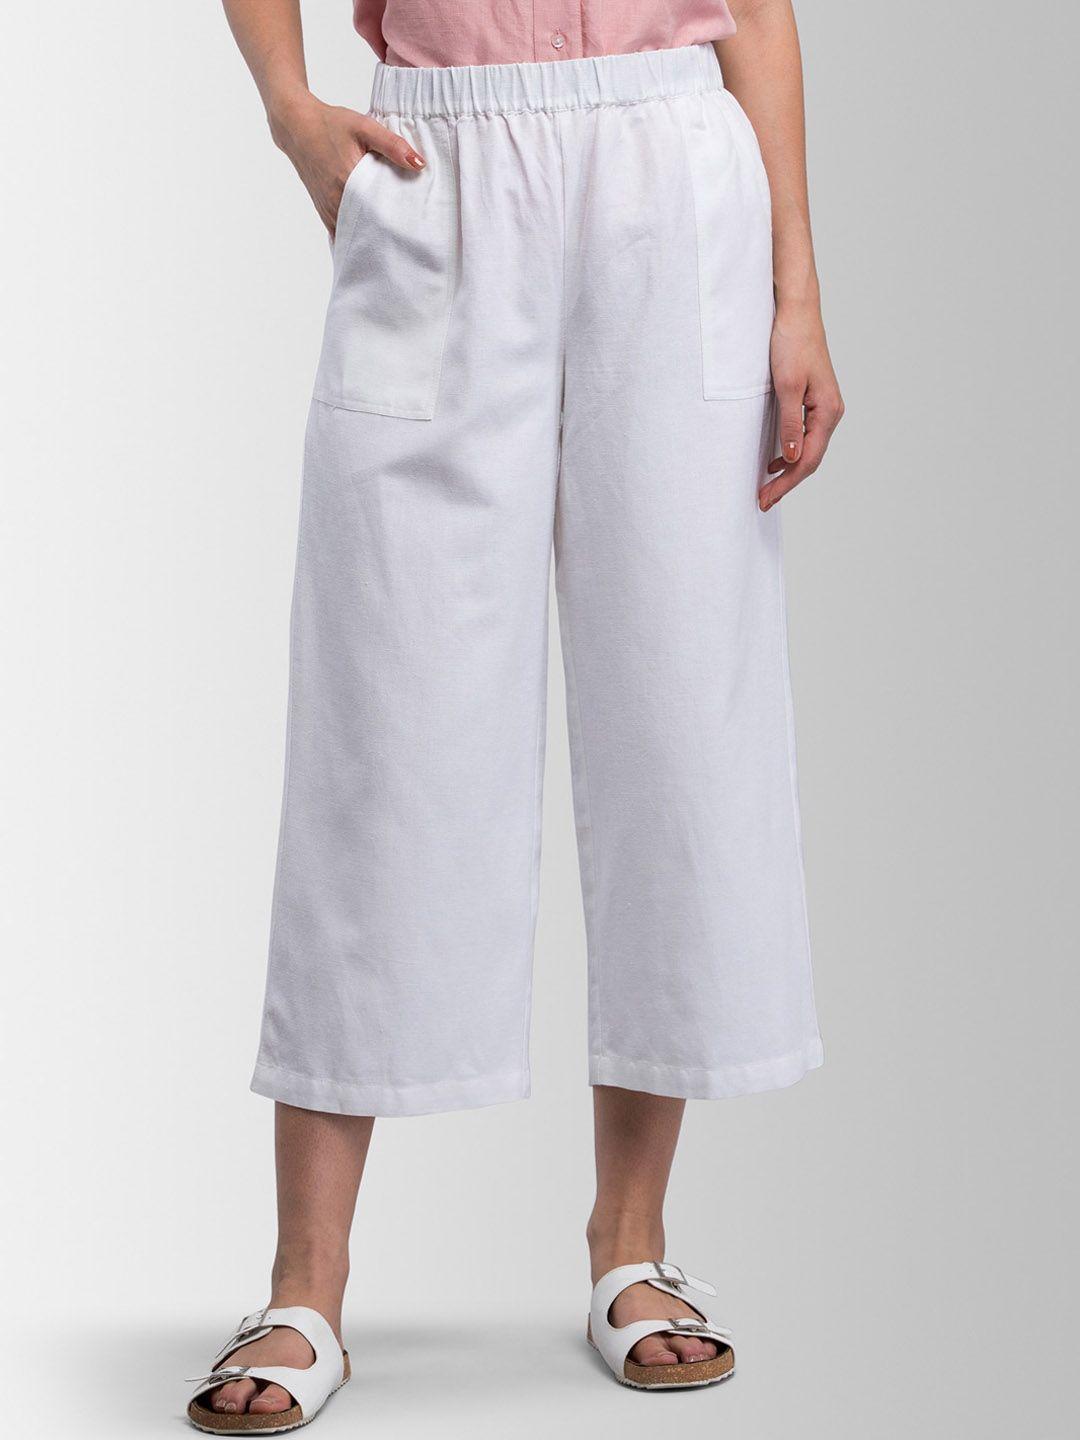 fablestreet women white loose fit solid culottes